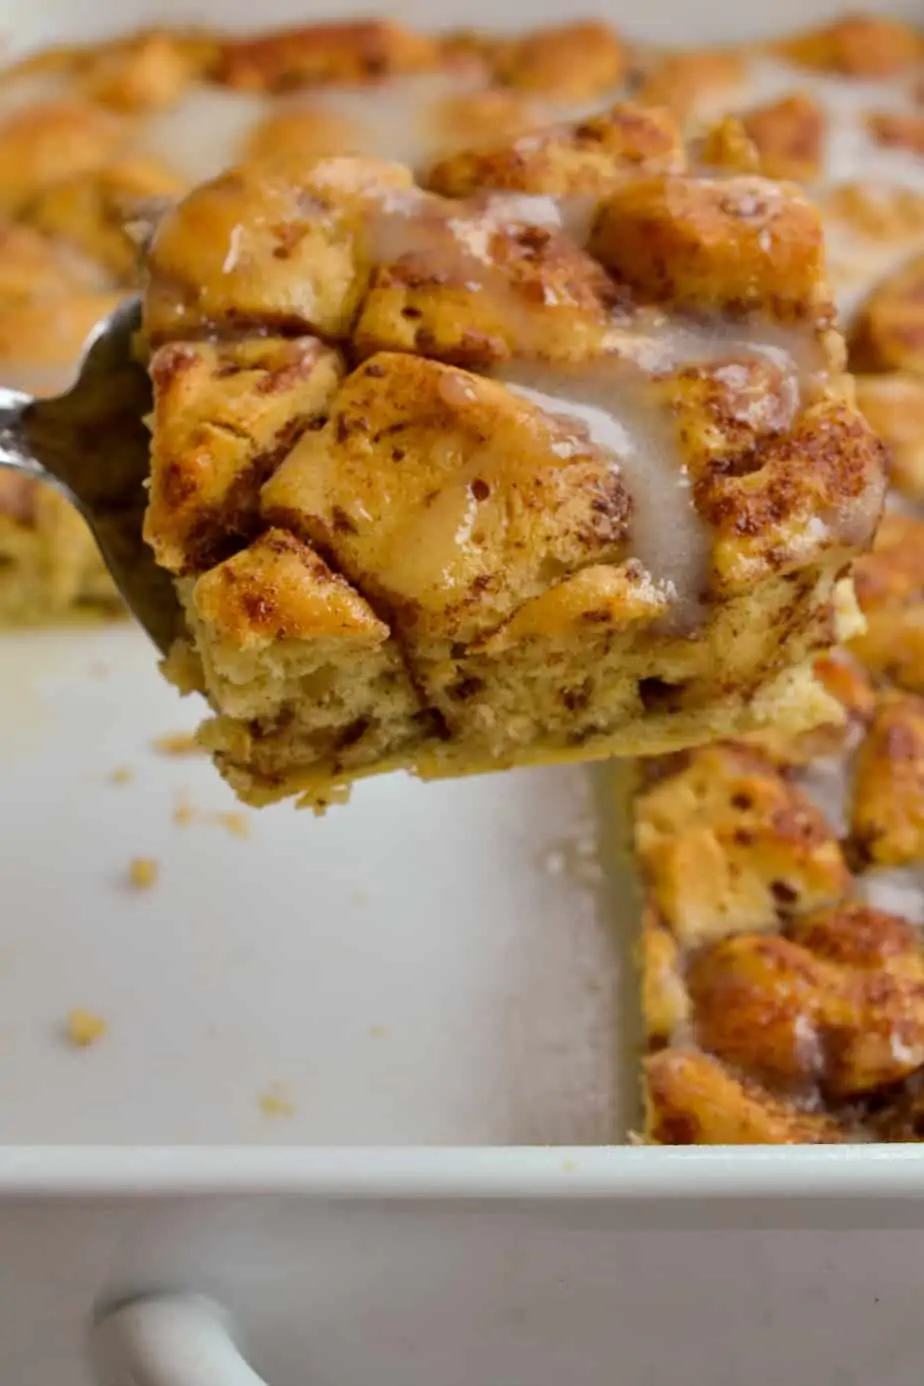 Warm and delicious cinnamon roll bake fresh from the oven. 